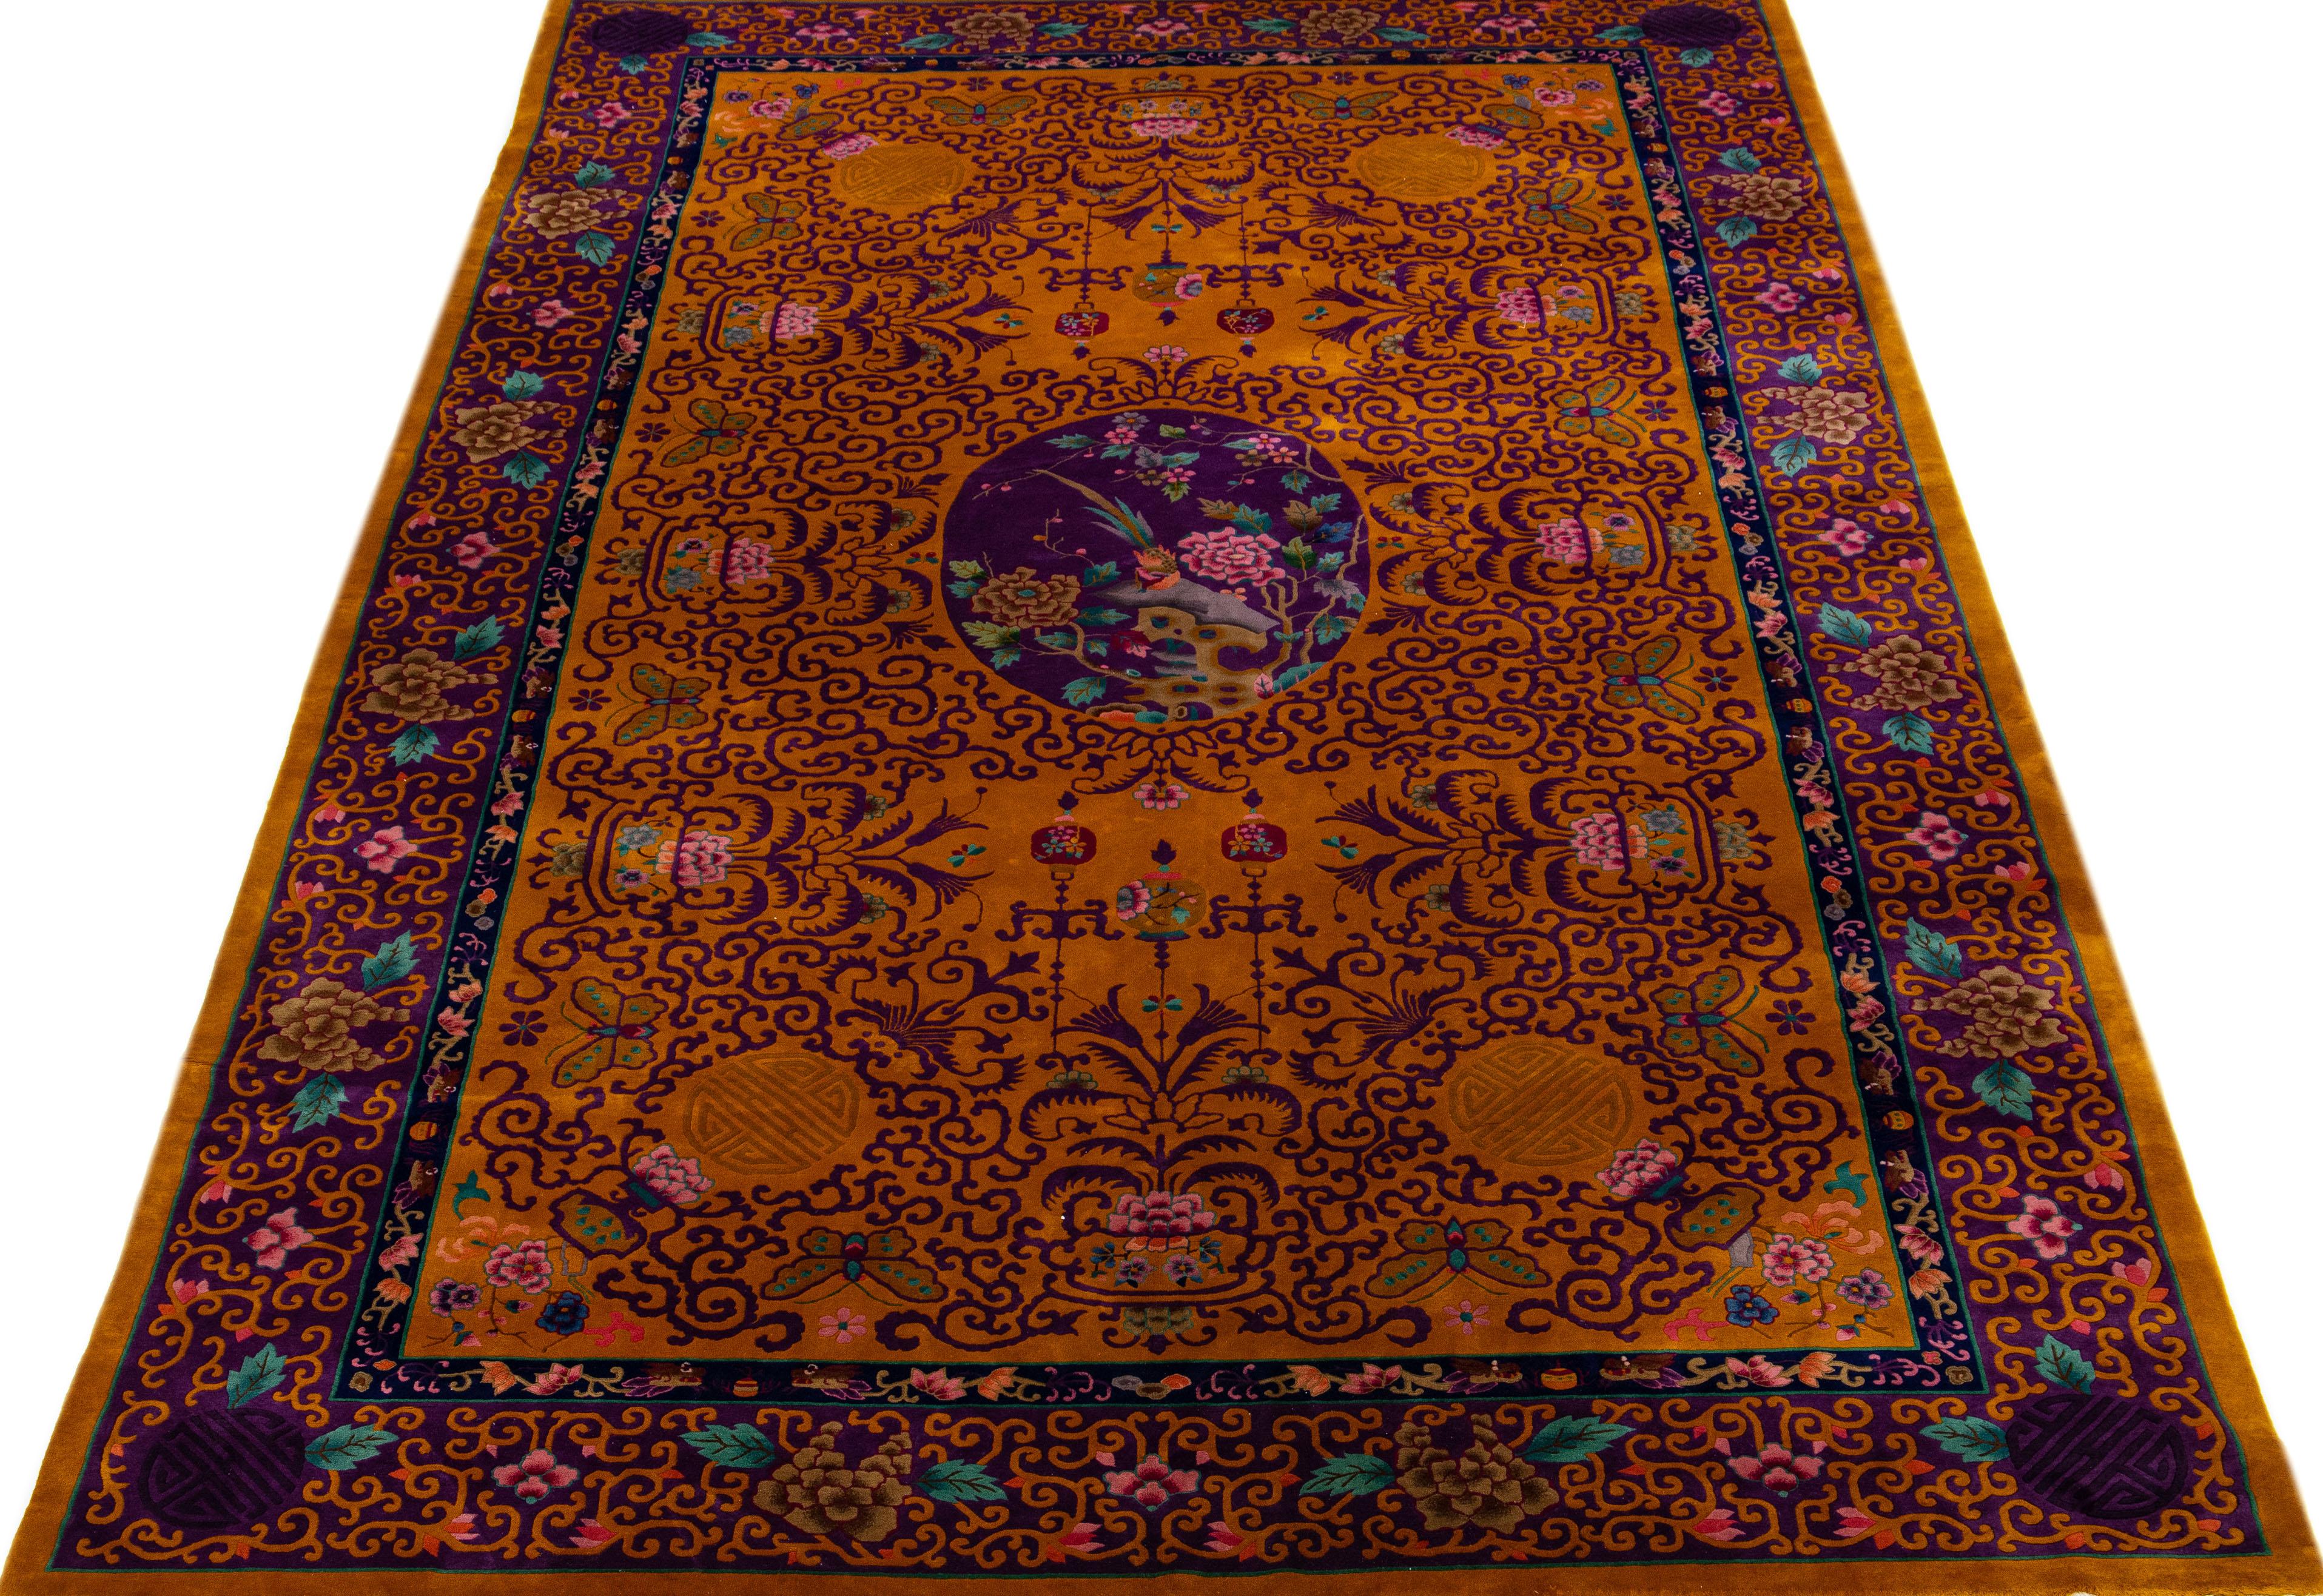 A beautiful oversize antique Chinese Art Deco wool rug with a goldenrod field. This hand knotted Rug has a frame of purple and multi-color accents in an all-over Chinese botanical design.

This rug measures 11' 9